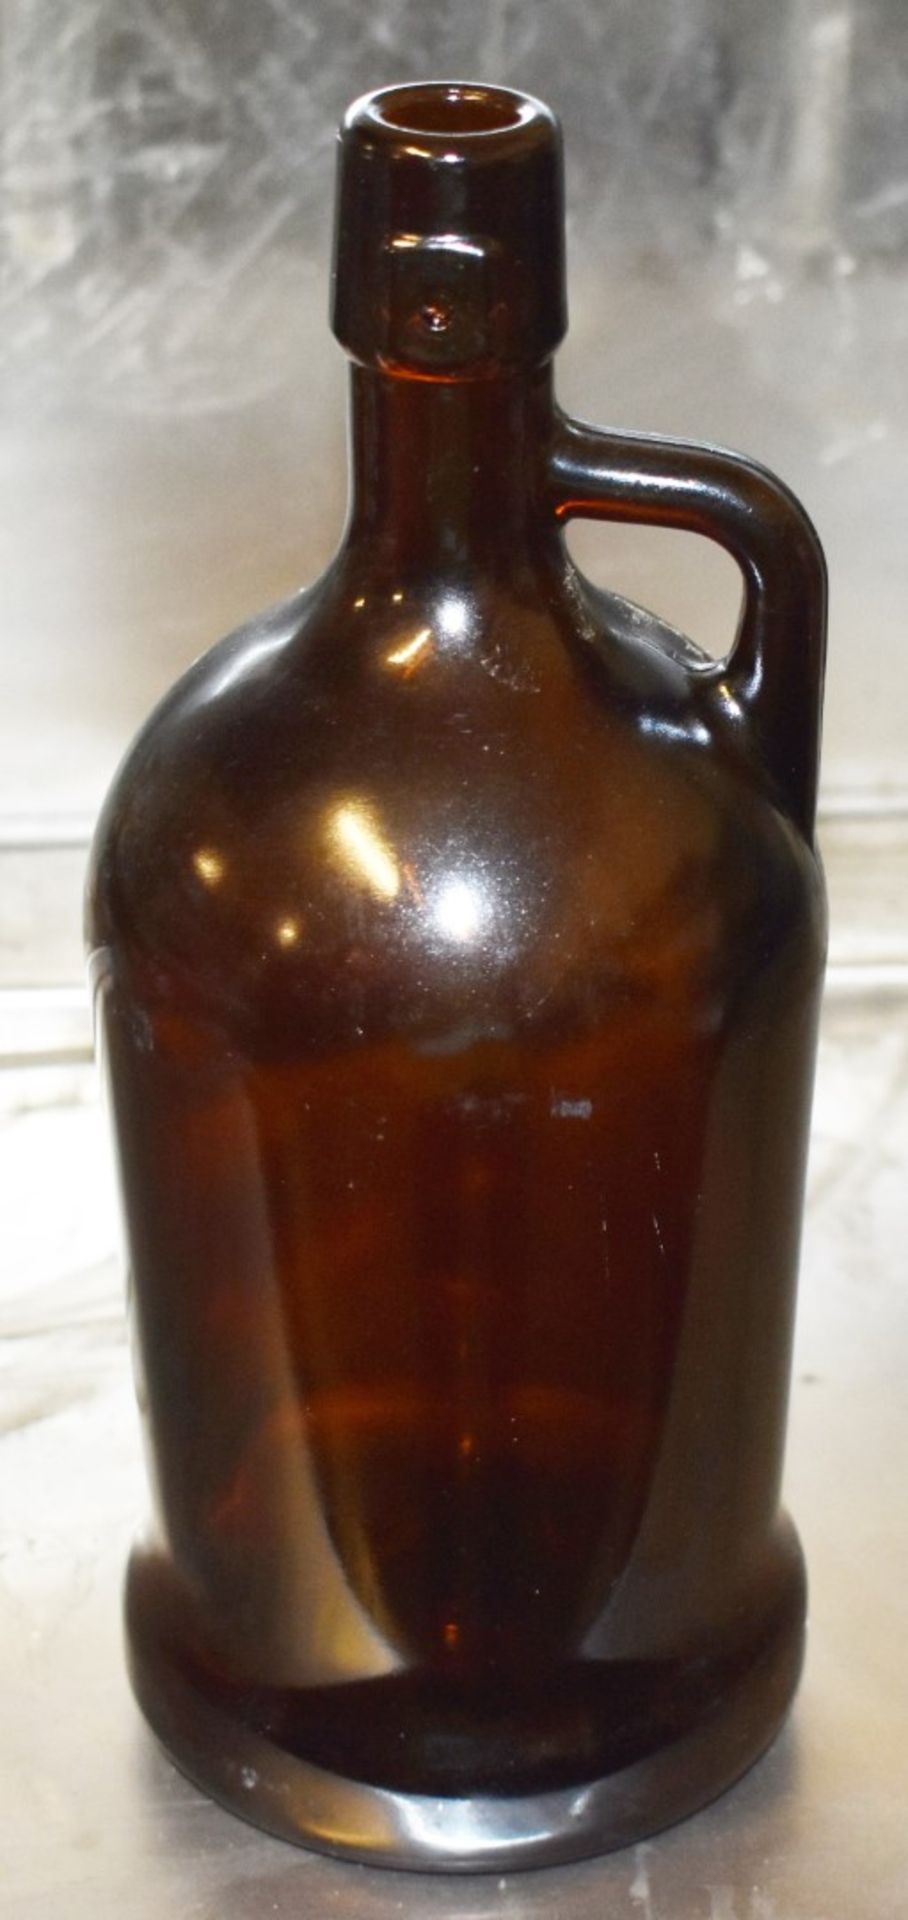 200 x Brown Glass Beer Bottles With Handle - 100cl 75mm - Height 25cms x Diameter 10cms - New and